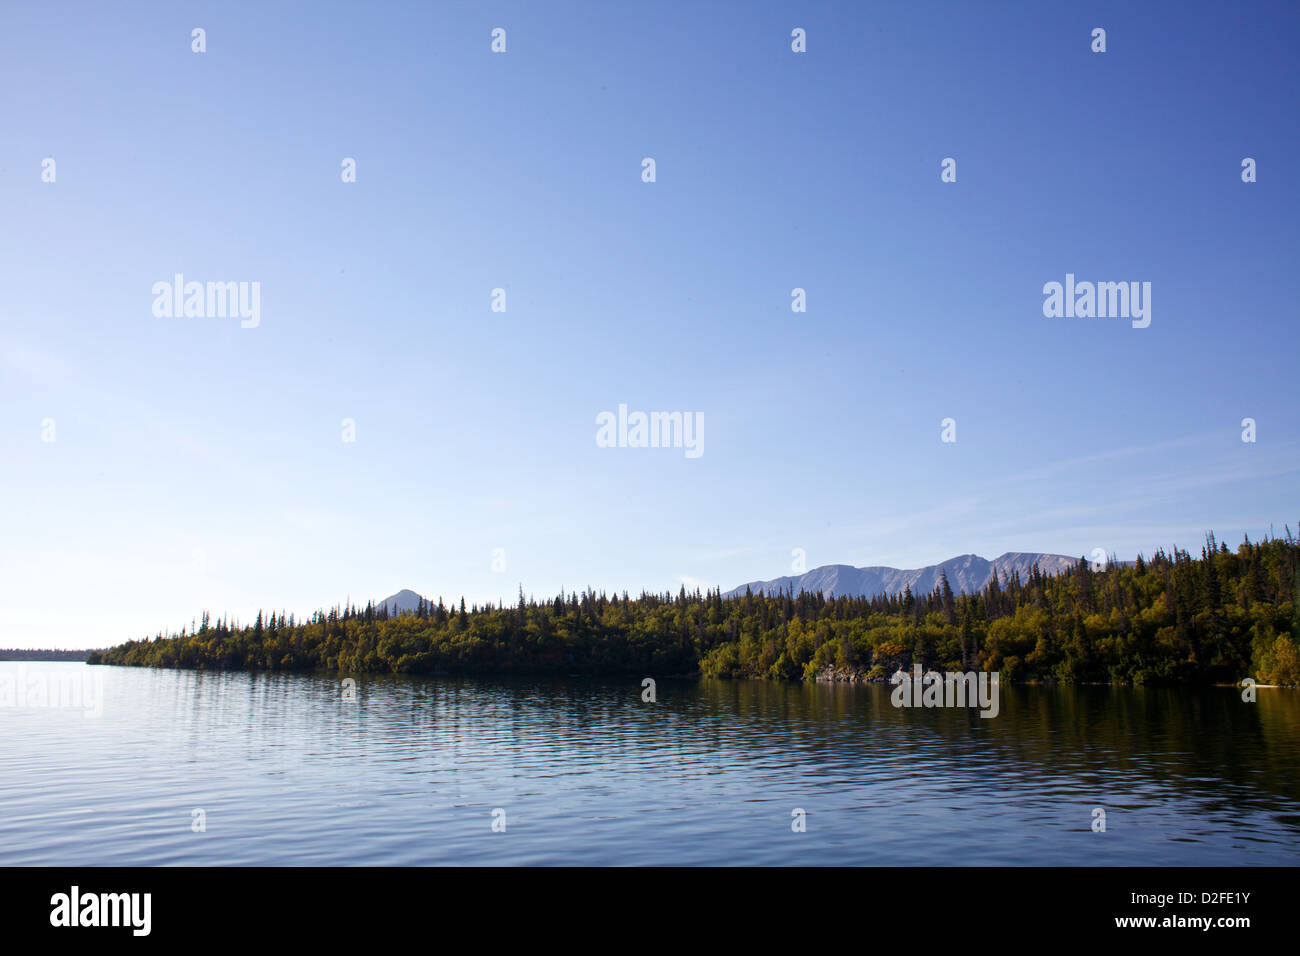 Forests and mountains on Lake Iliamna in Alaska Stock Photo